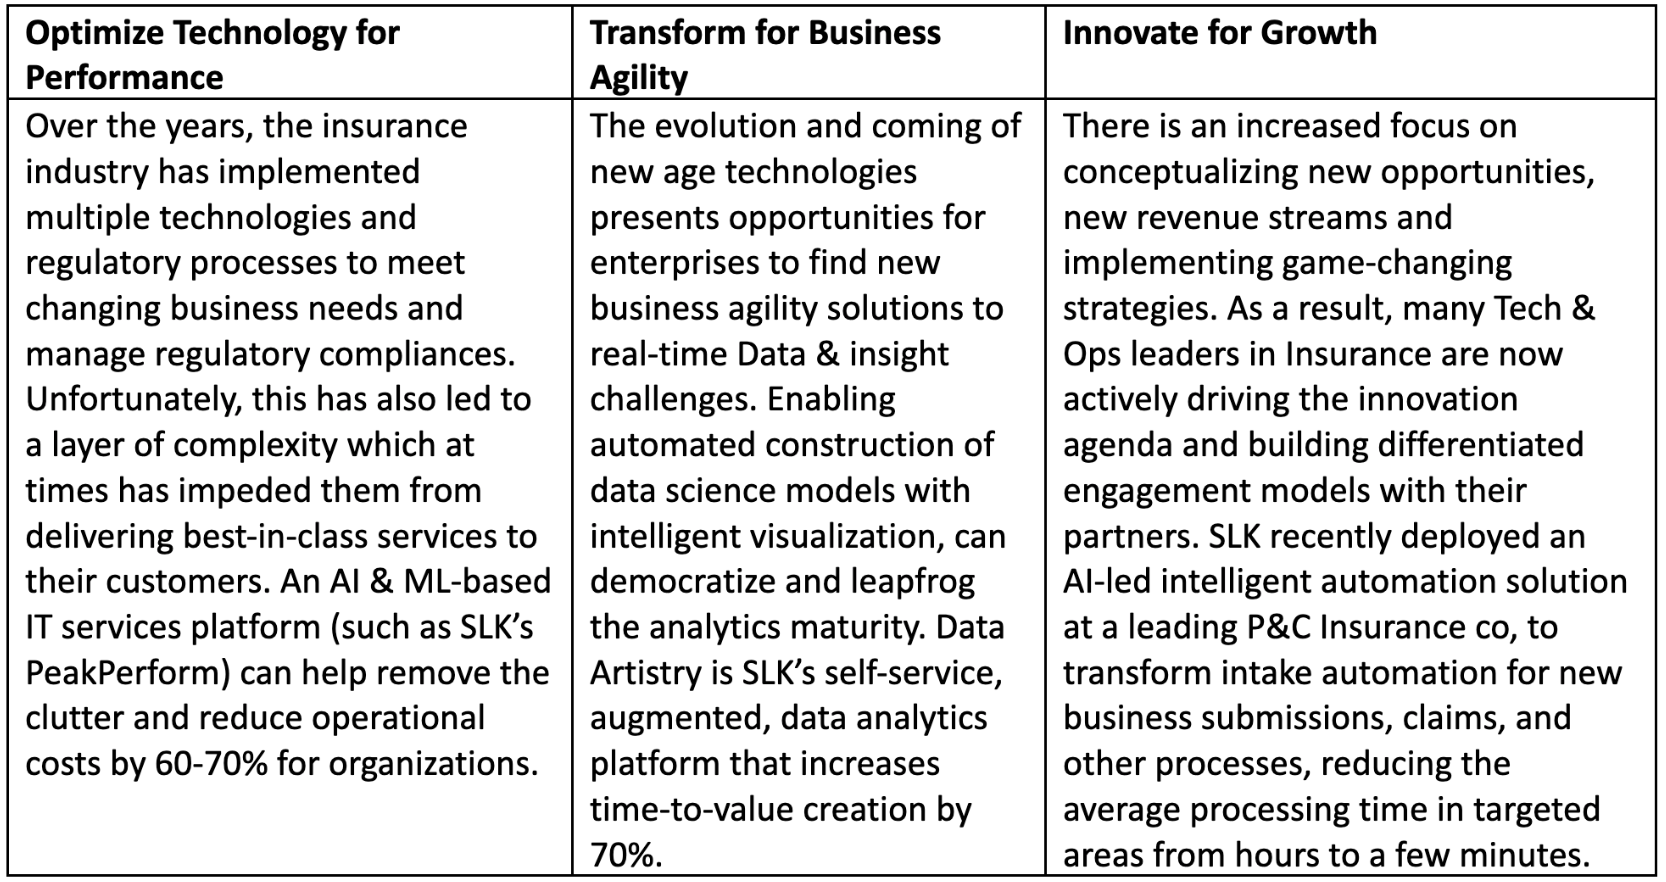 Chart detailing innovation, growth, and technology